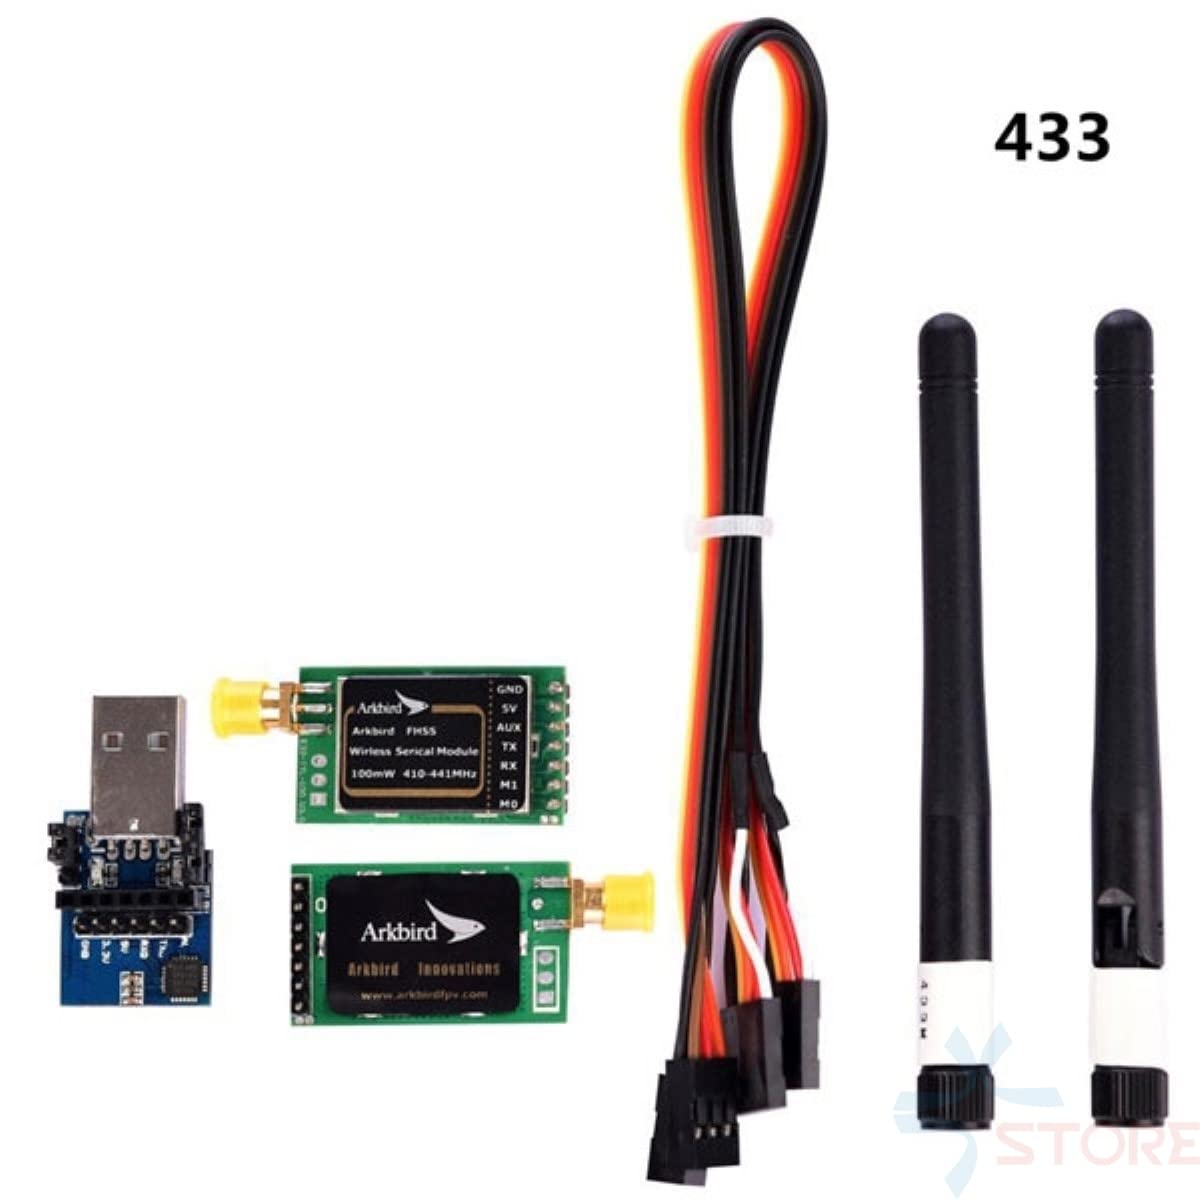 Ground Control Station 433MHz 433 Serial Module 100mW RC Aircraft Data Transmission Module